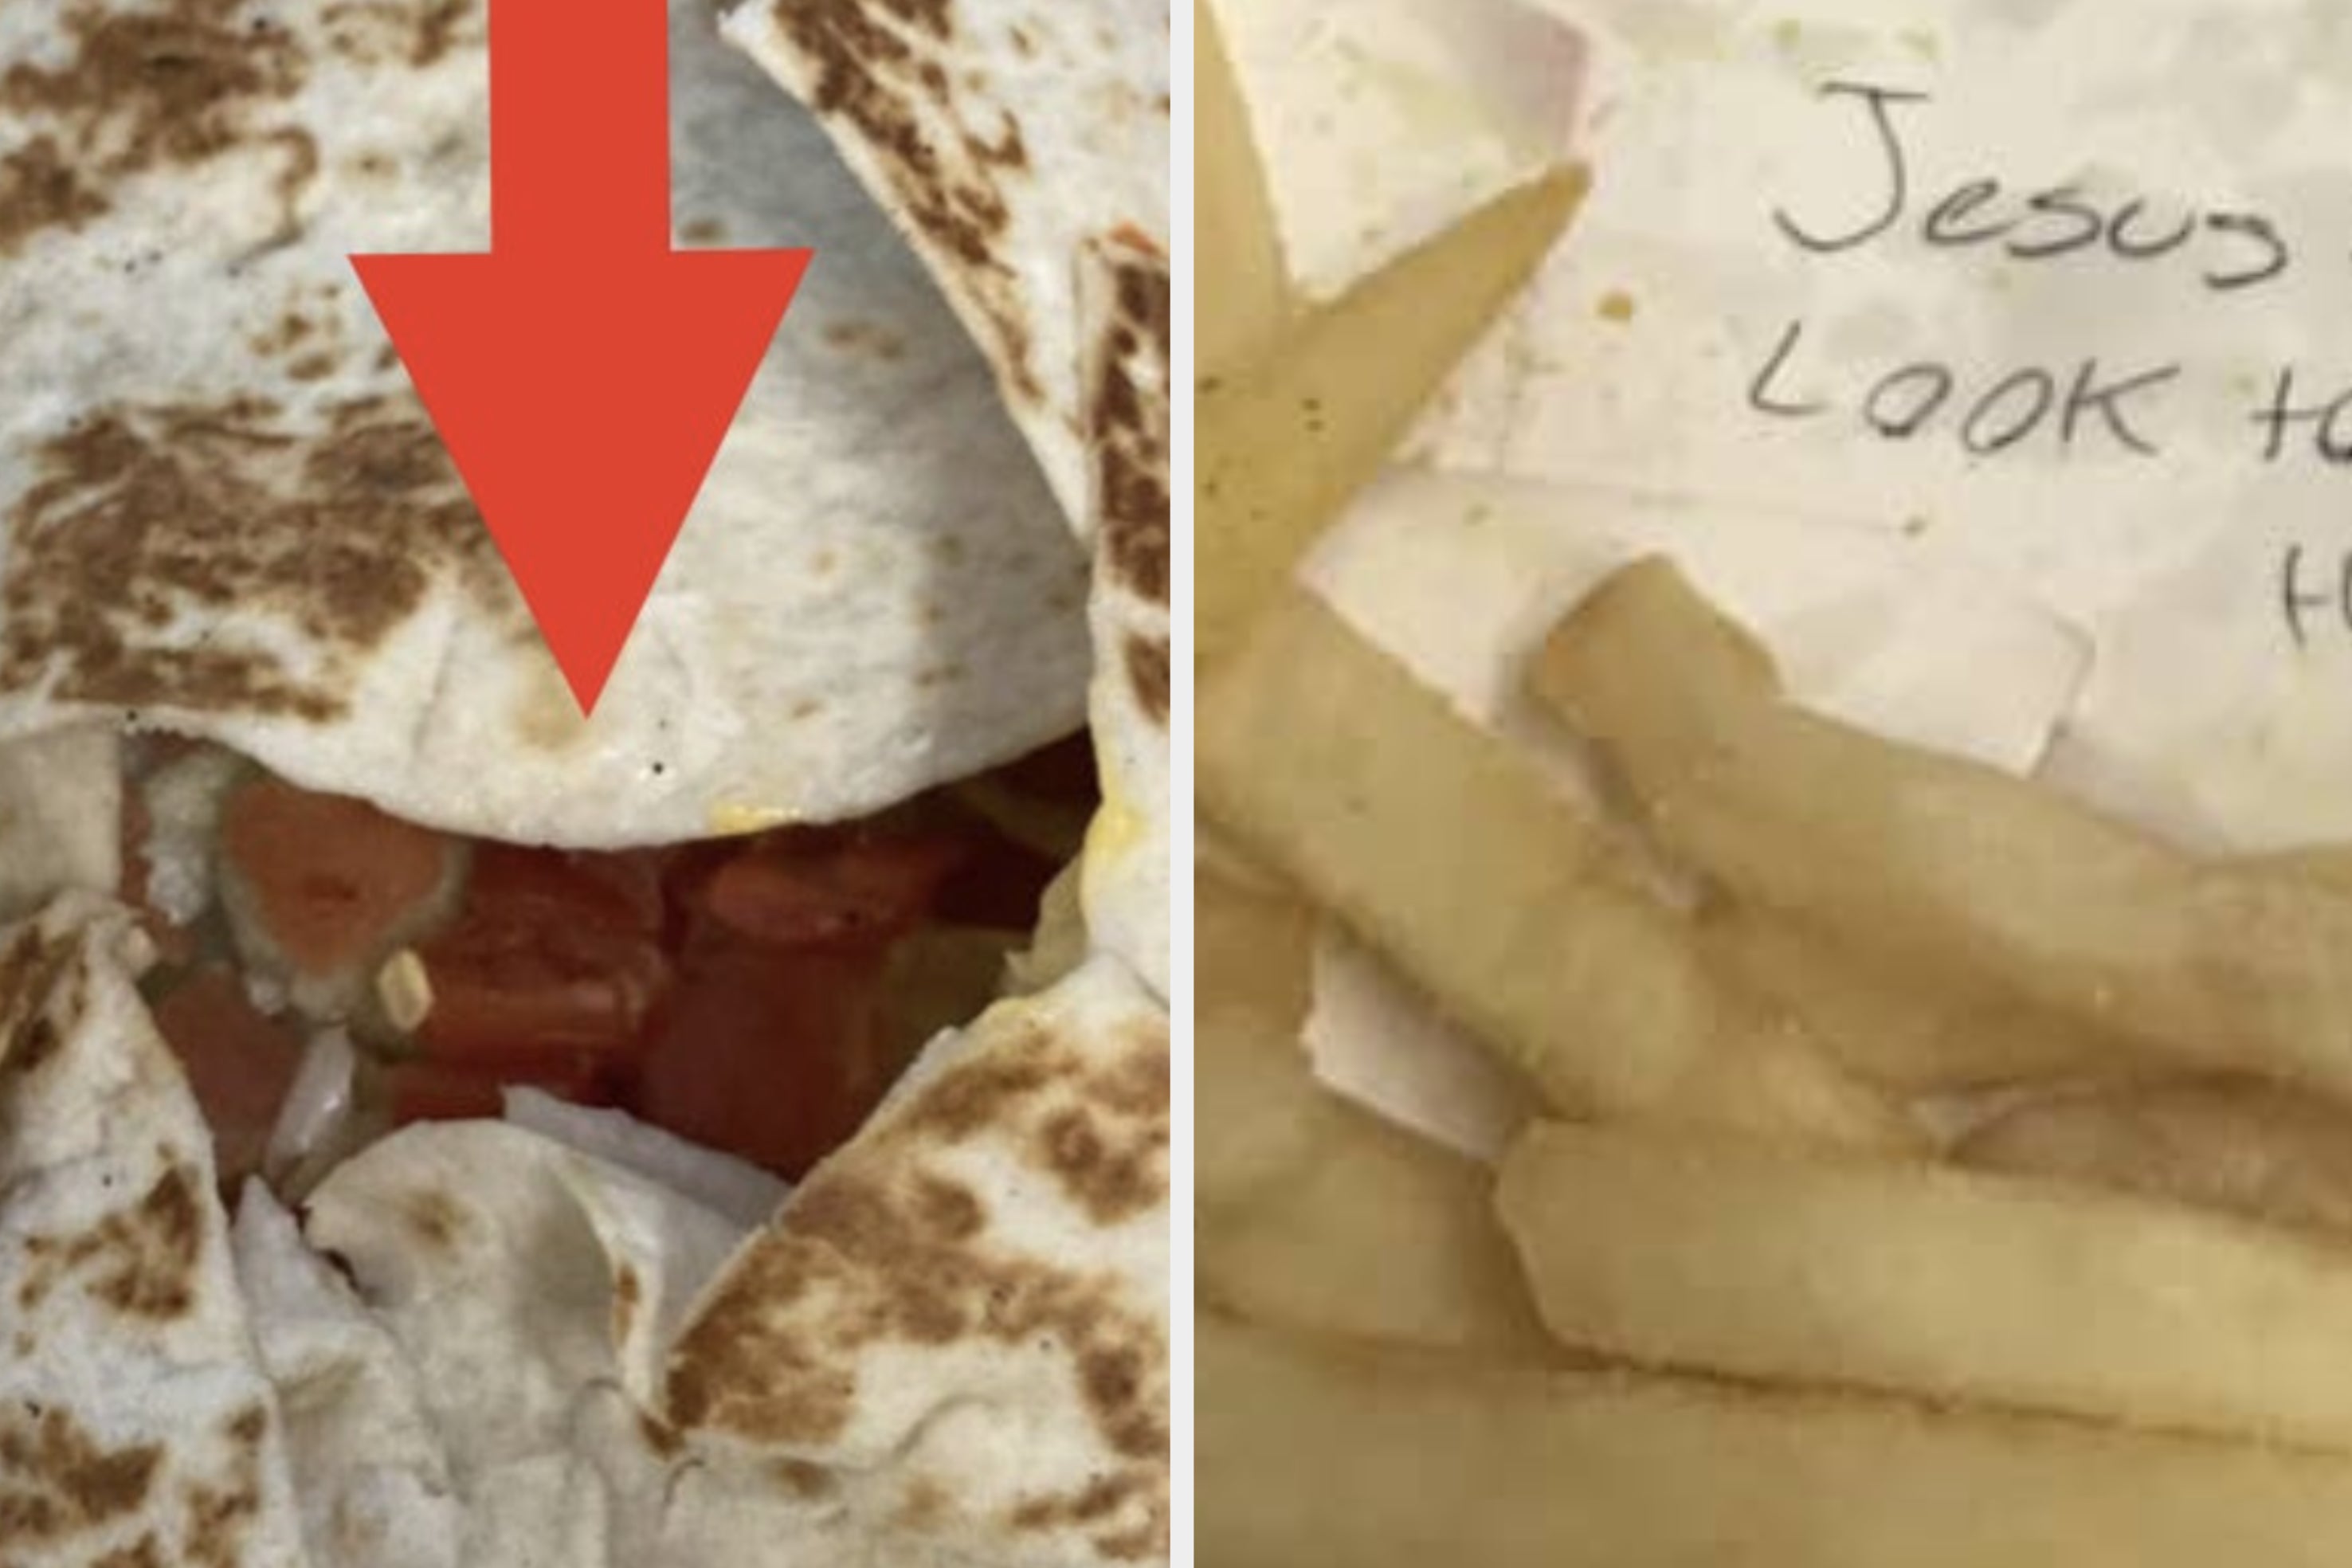 15 Times People "Ruined It For The Rest Of Us"